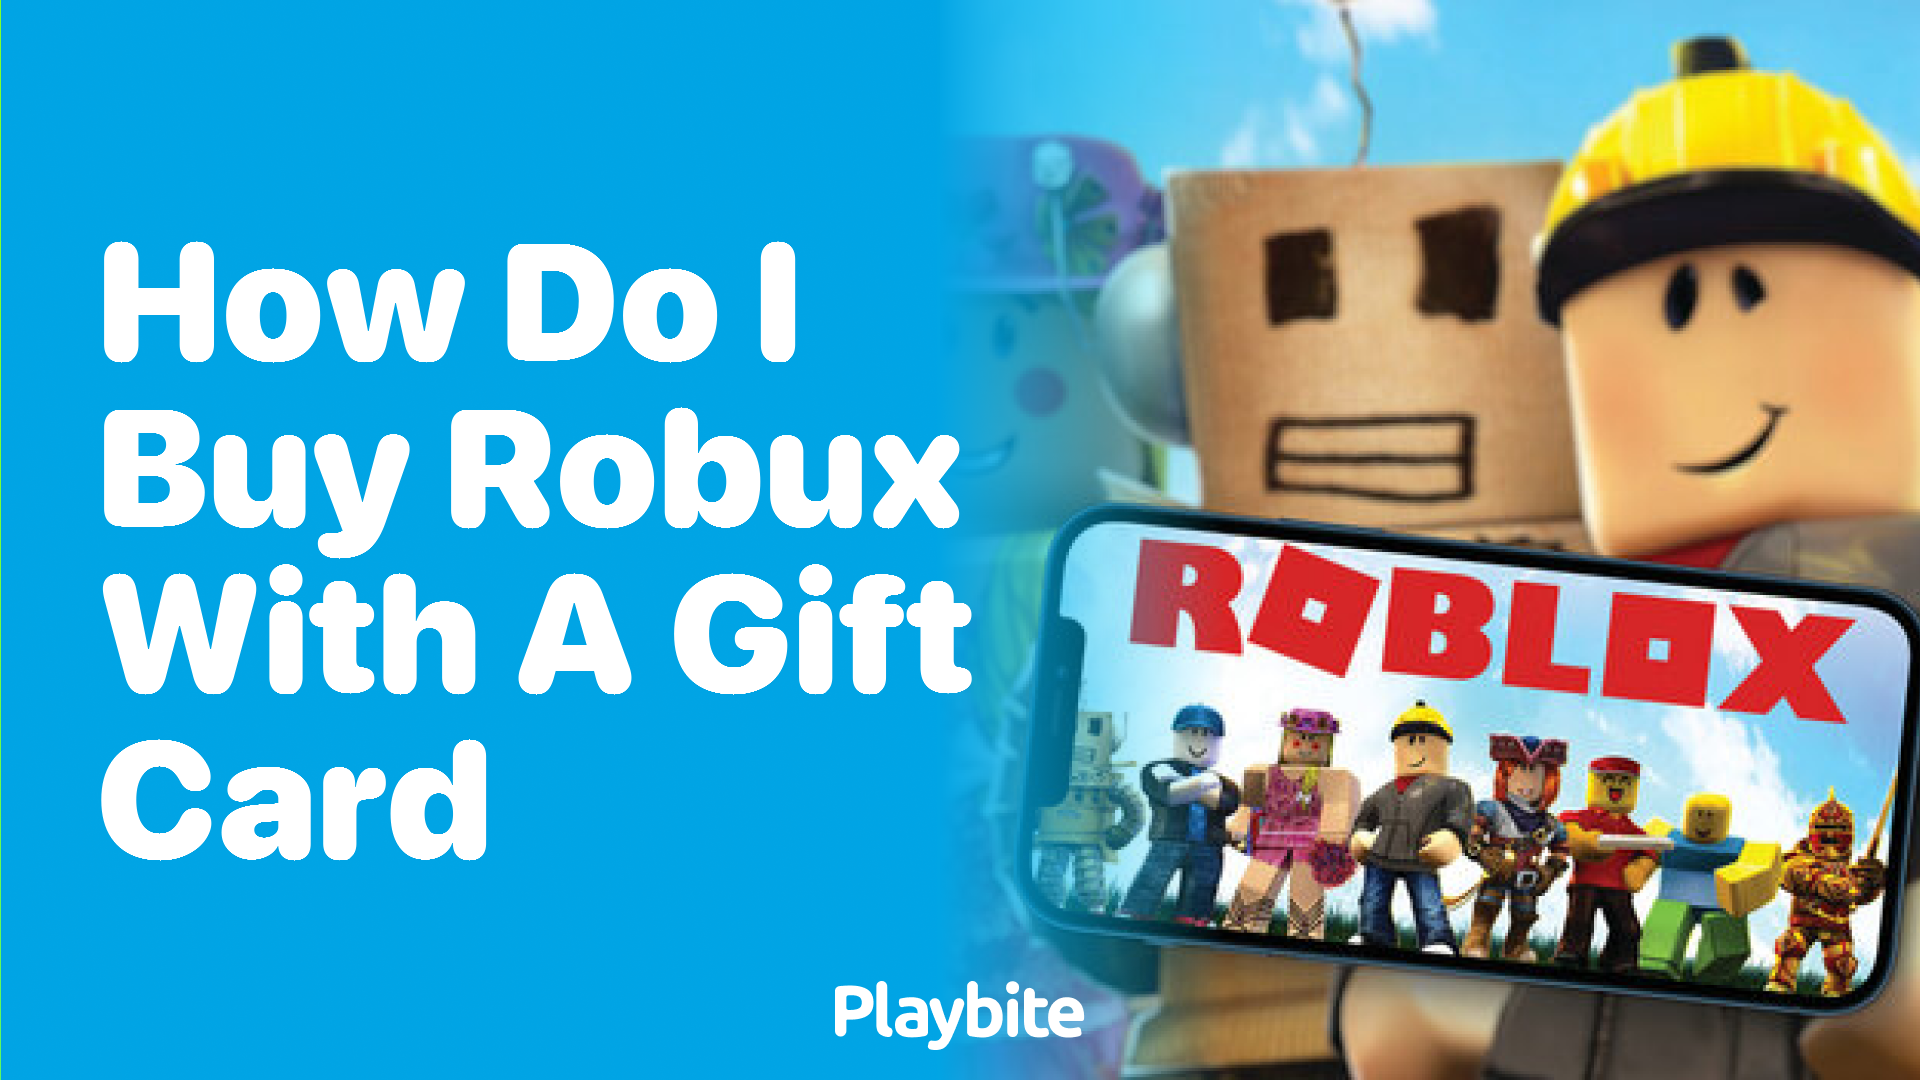 How Do I Buy Robux with a Gift Card?